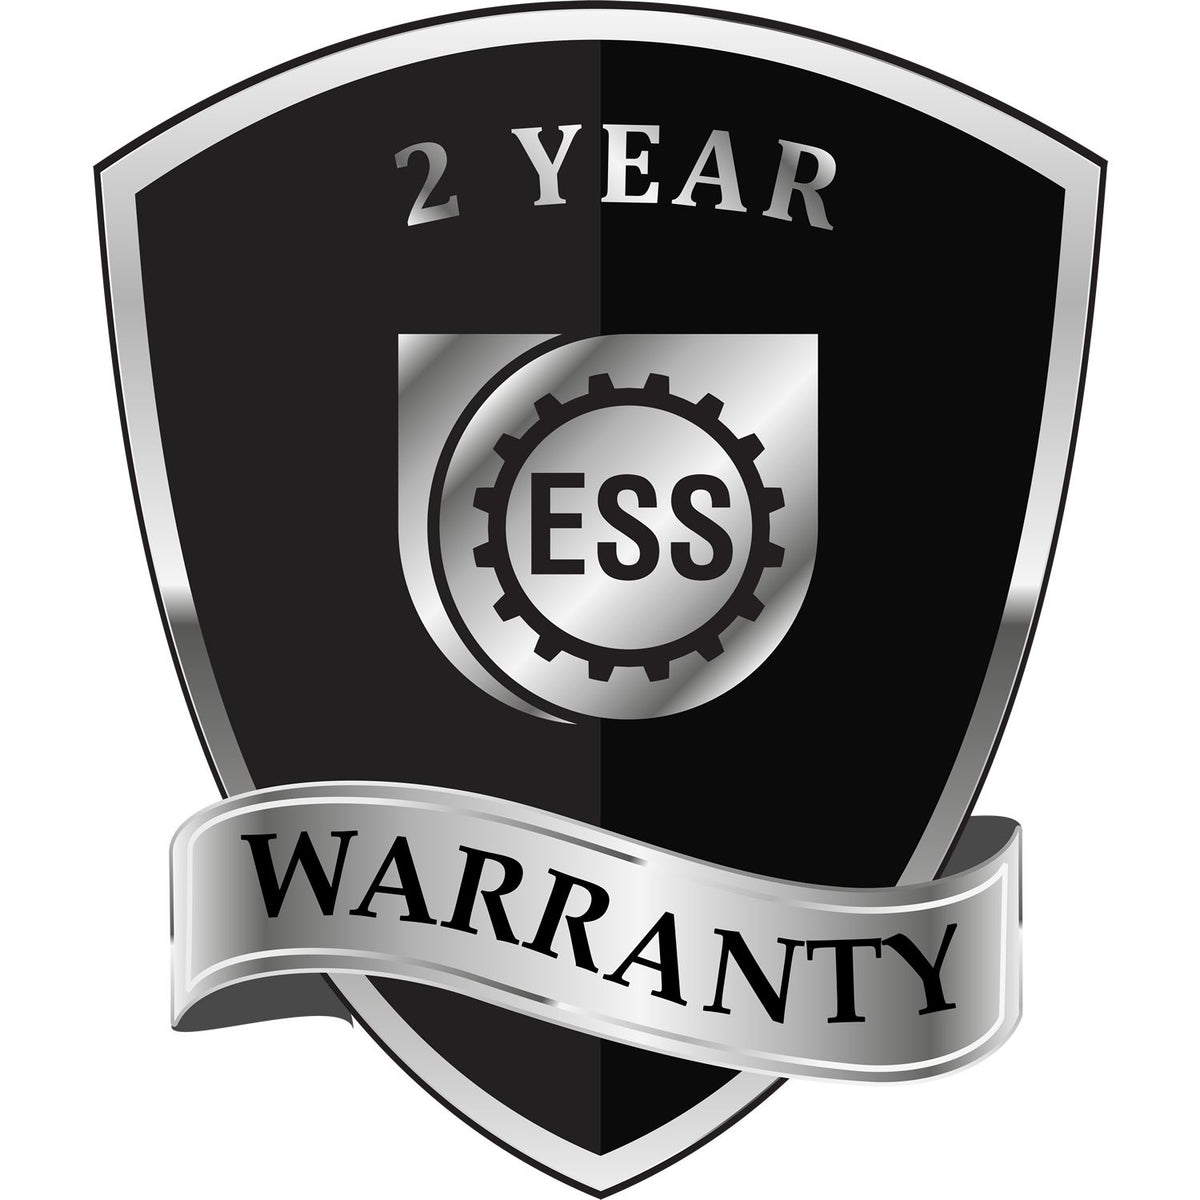 A black and silver badge or emblem showing warranty information for the Gift Vermont Geologist Seal